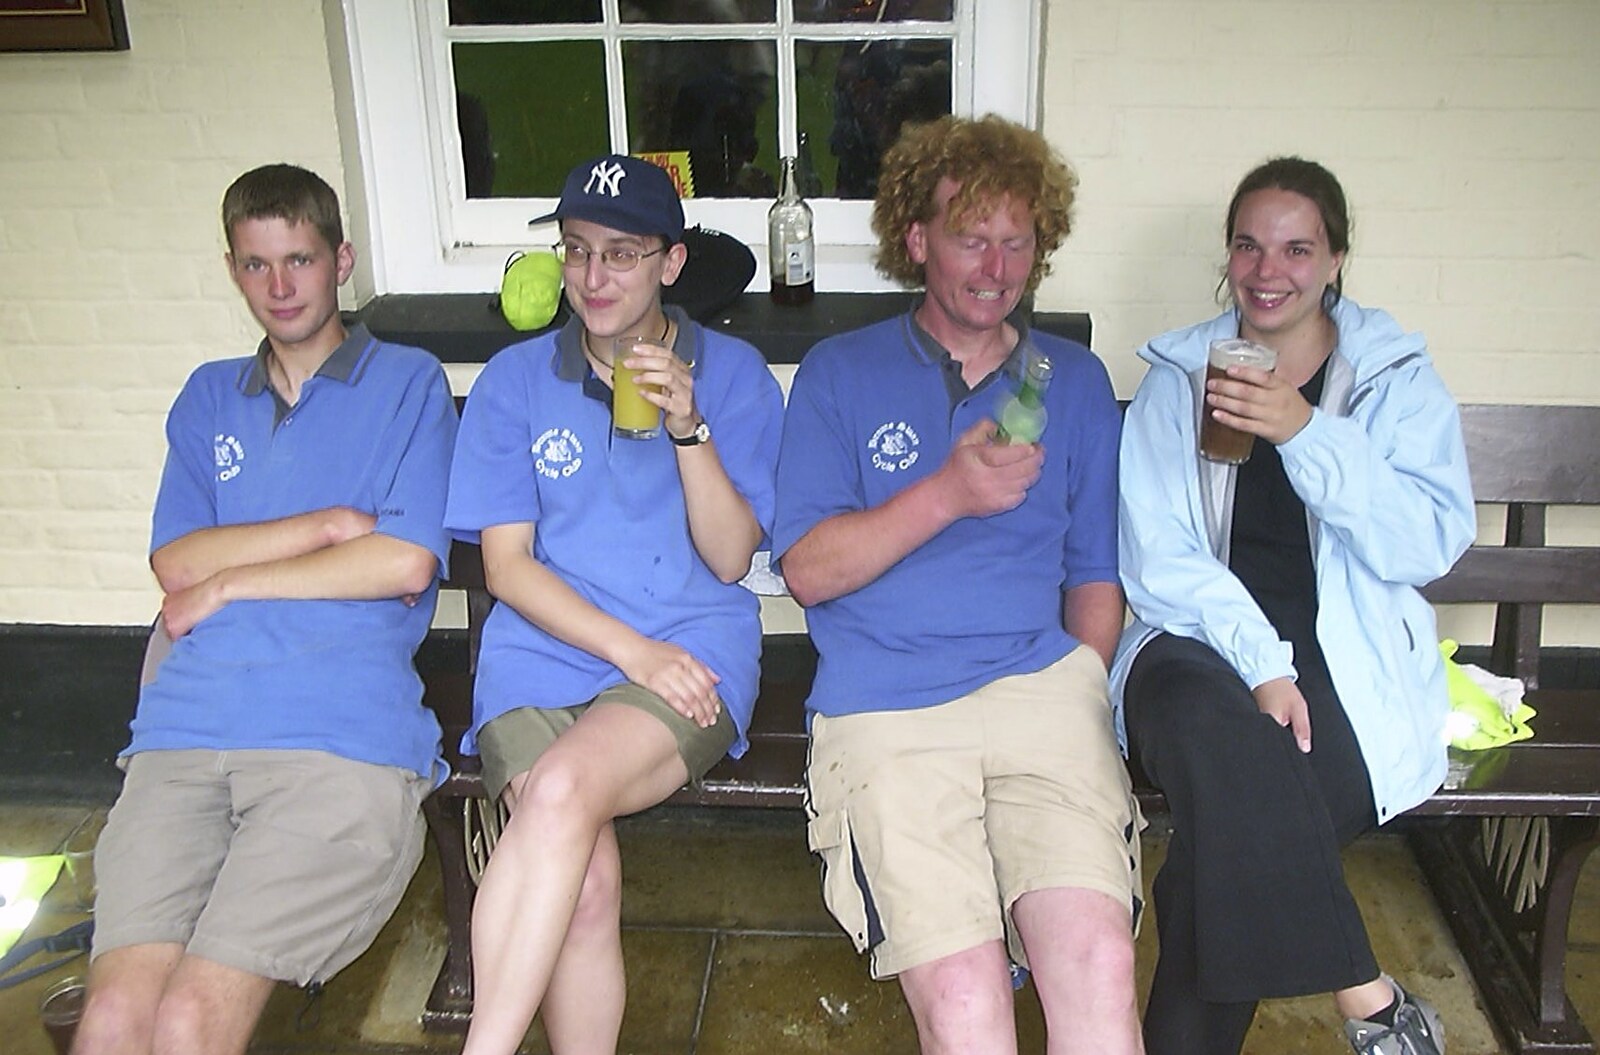 The BSCC Annual Sponsored Bike Ride, The Cottage, Thorpe St. Andrew, Norwich  - 18th July 2004: Phil, Suey, Wavy and Jen